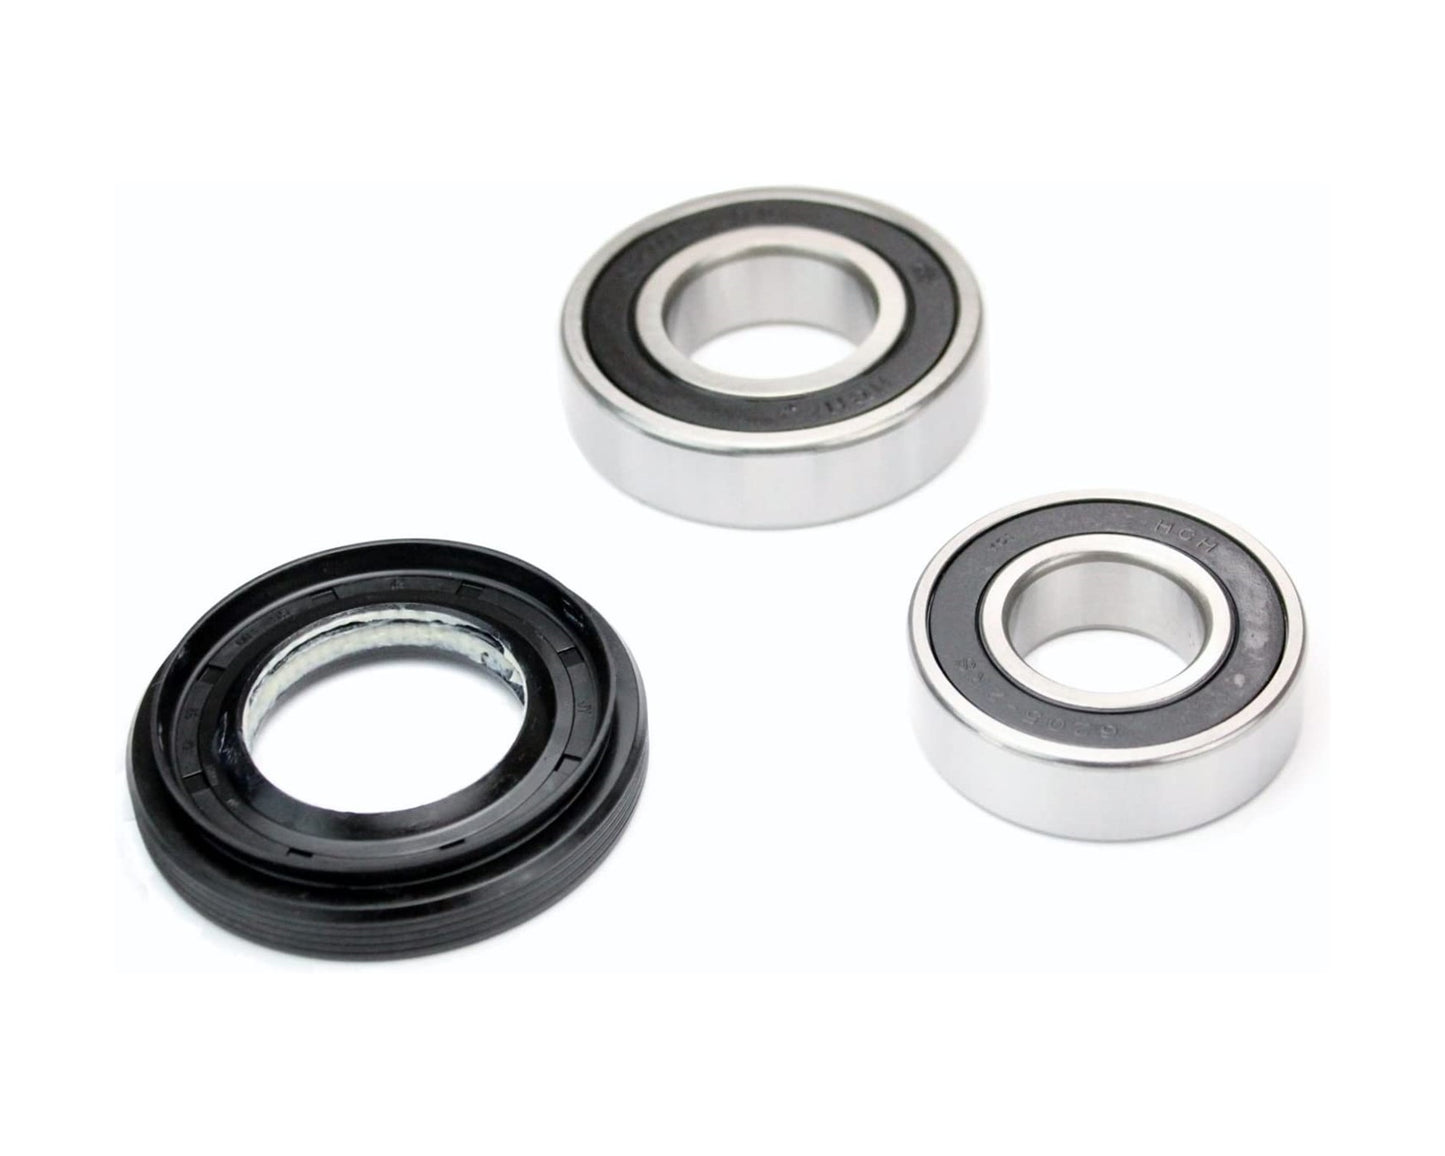 Washing Machine Bearing & Seal kit for LG WD1042FH WD11120FB WD12220FD WD1245FHB